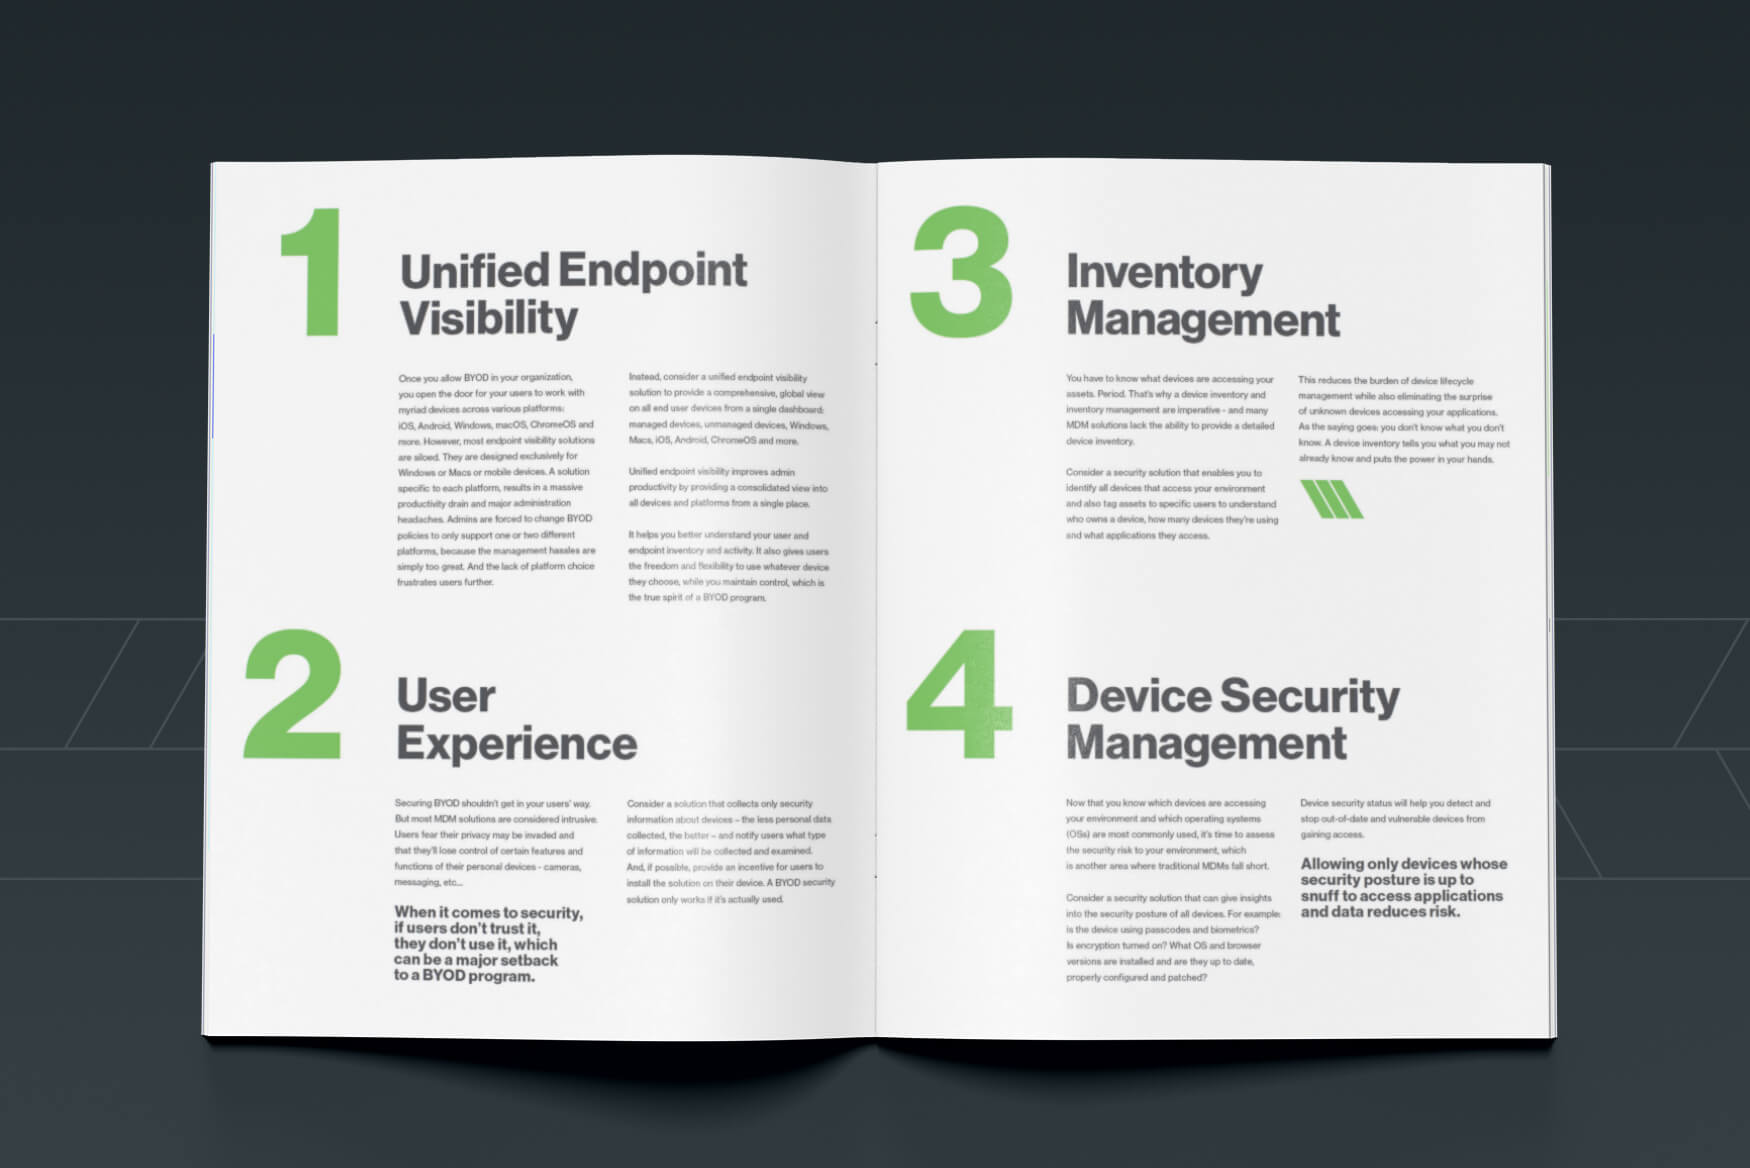 Pages with headers: 1. Unified Endpoint Visibility, 2. User Experience, 3. Inventory Management, 4. Device Security Management.